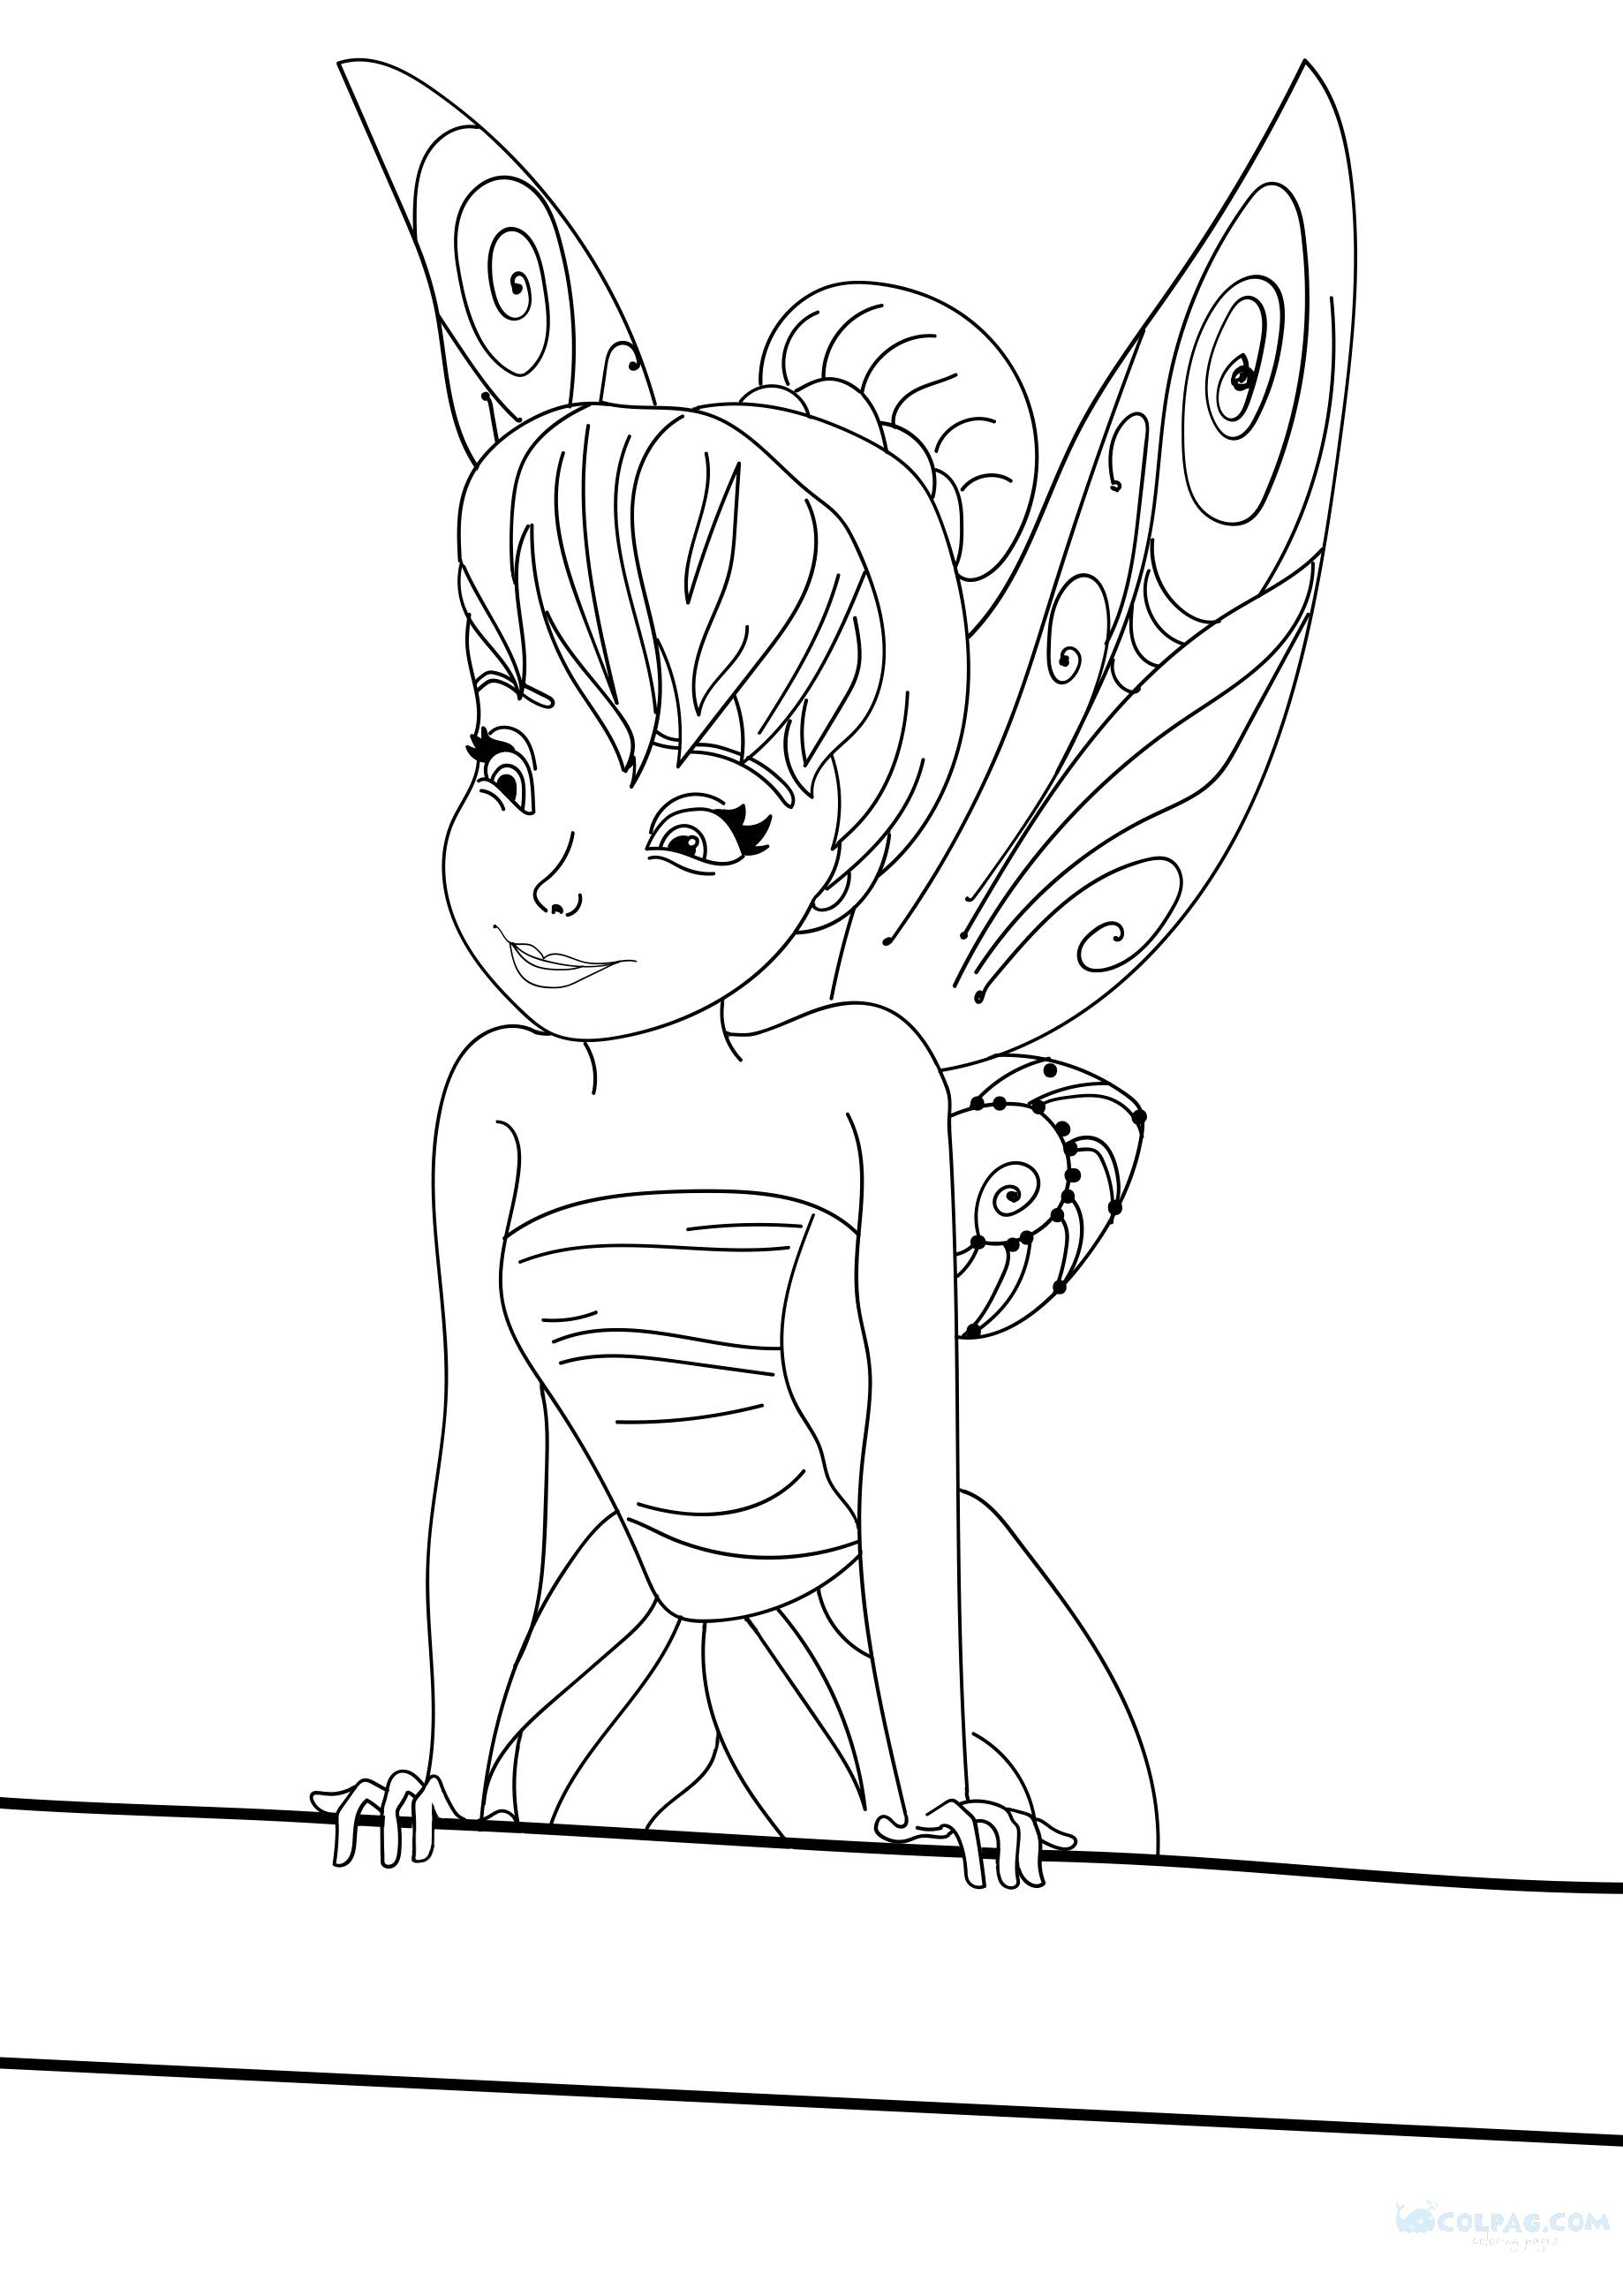 tinkerbell-coloring-page-colpag-com-2